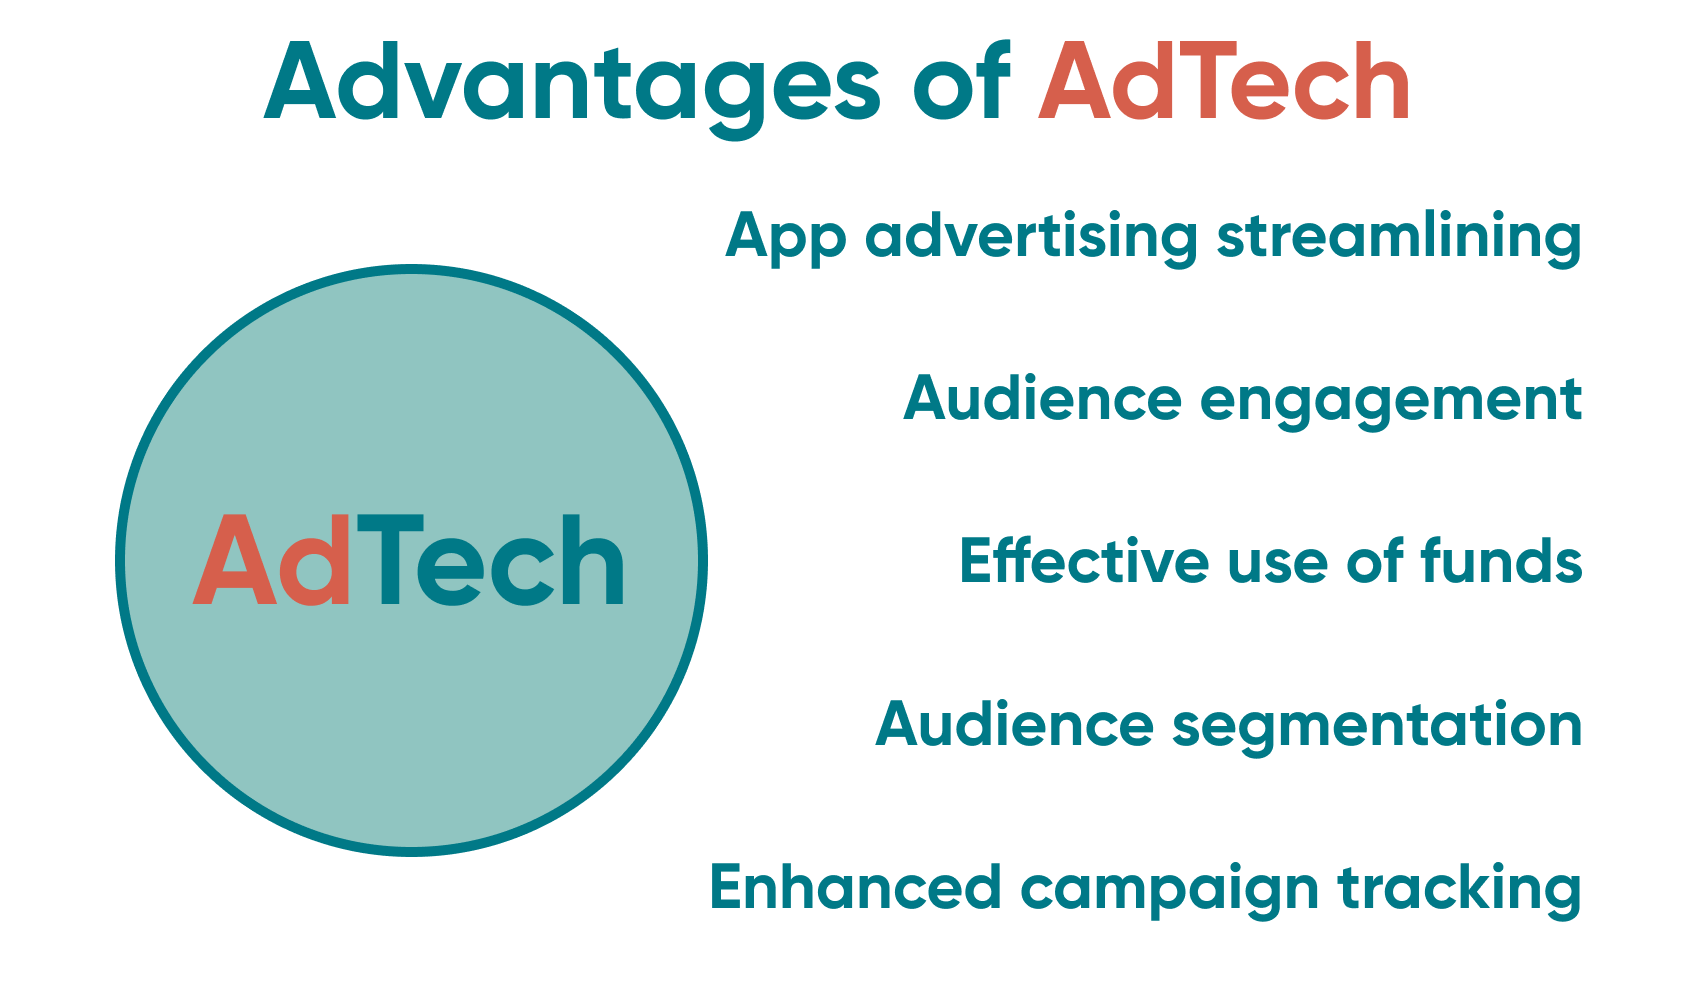 There are many advantages for integrating AdTech within a marketing campaign. Here we can see some of the more obvious. 